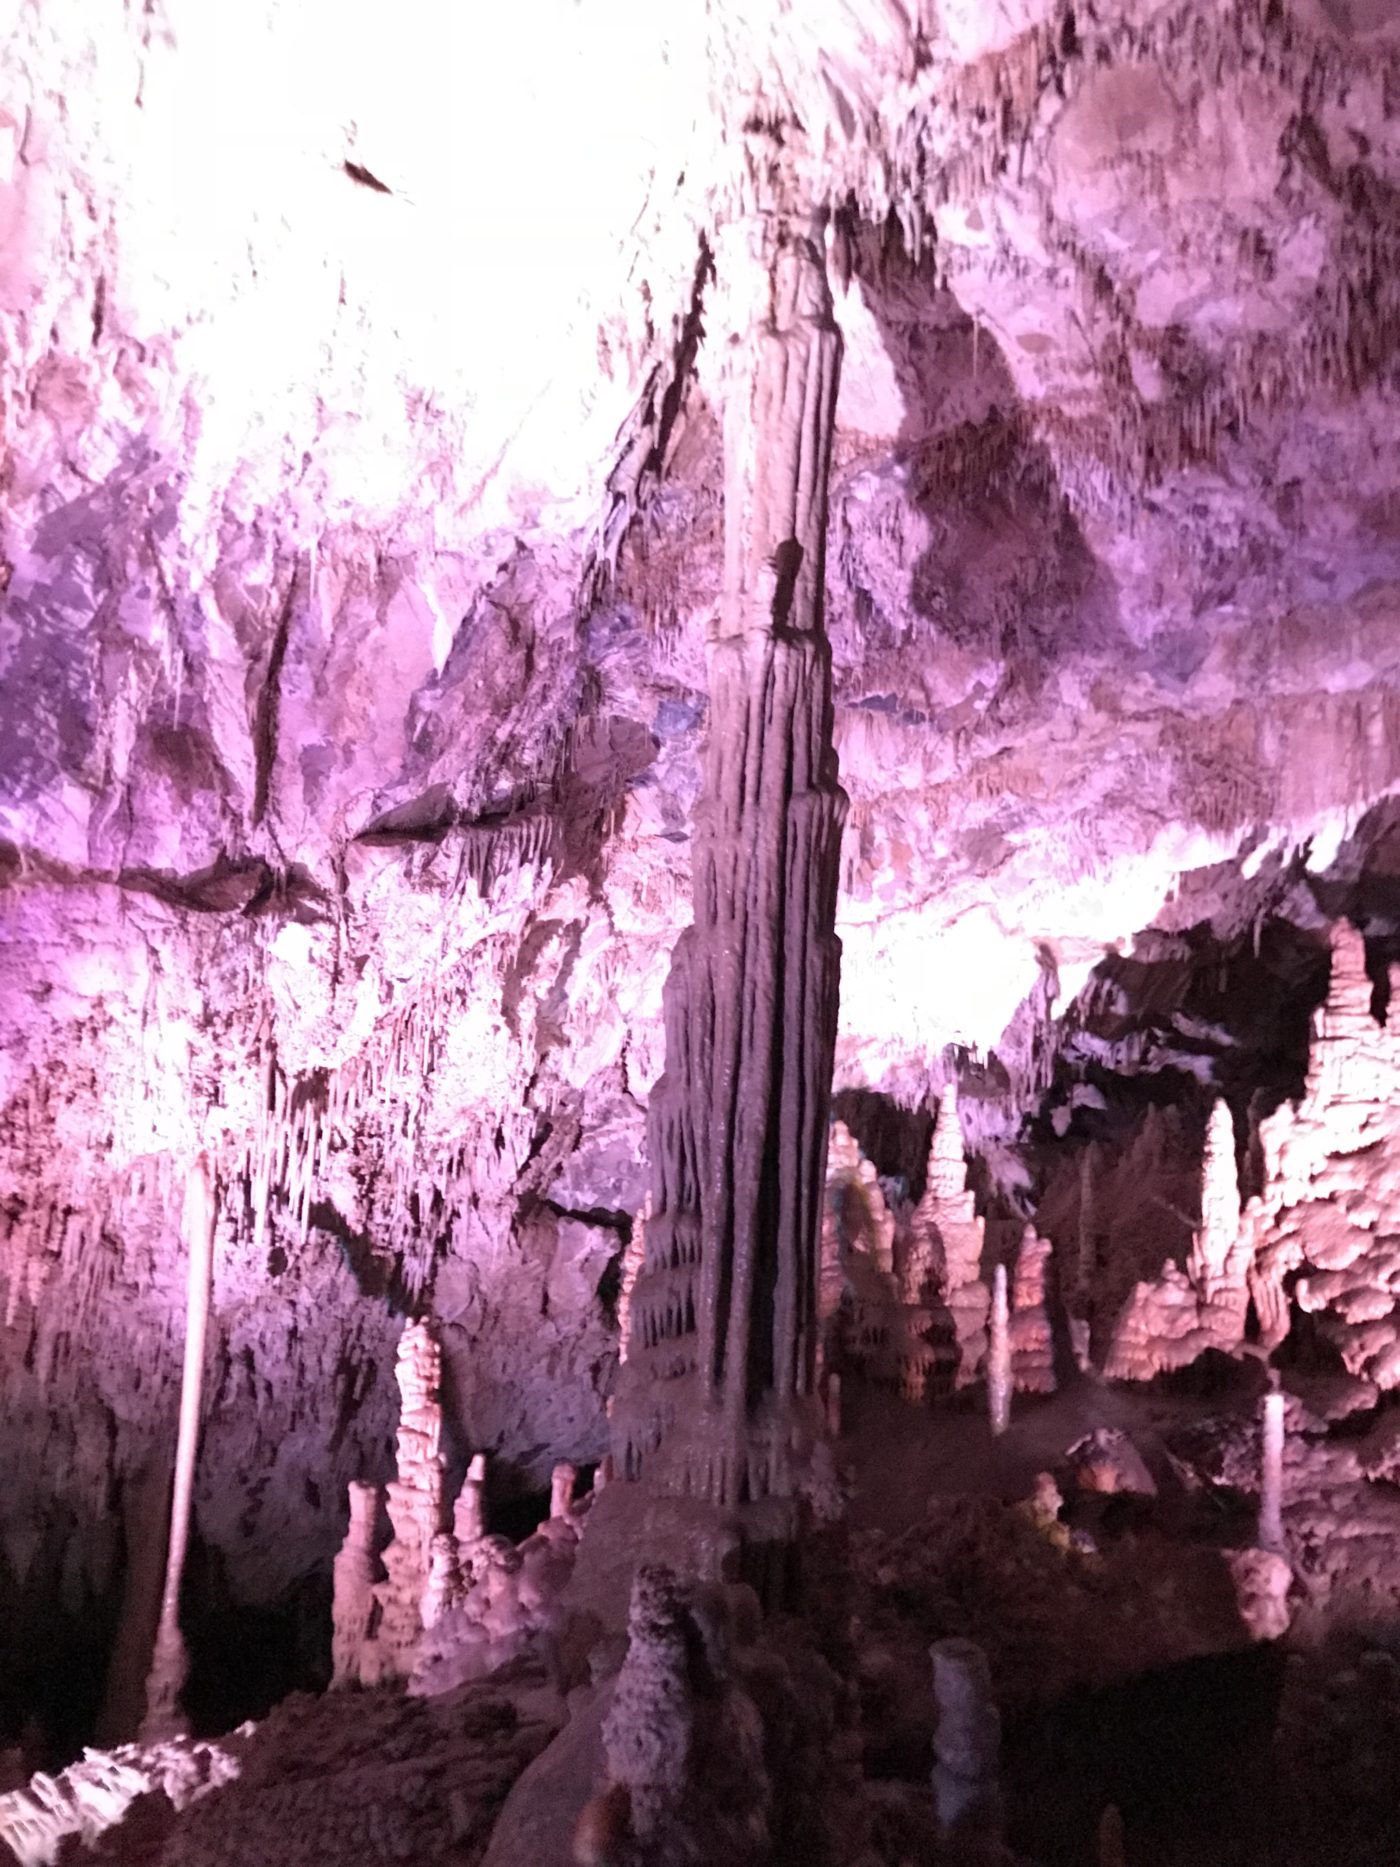 Caving with a Baby at Montana’s Lewis and Clark Caverns